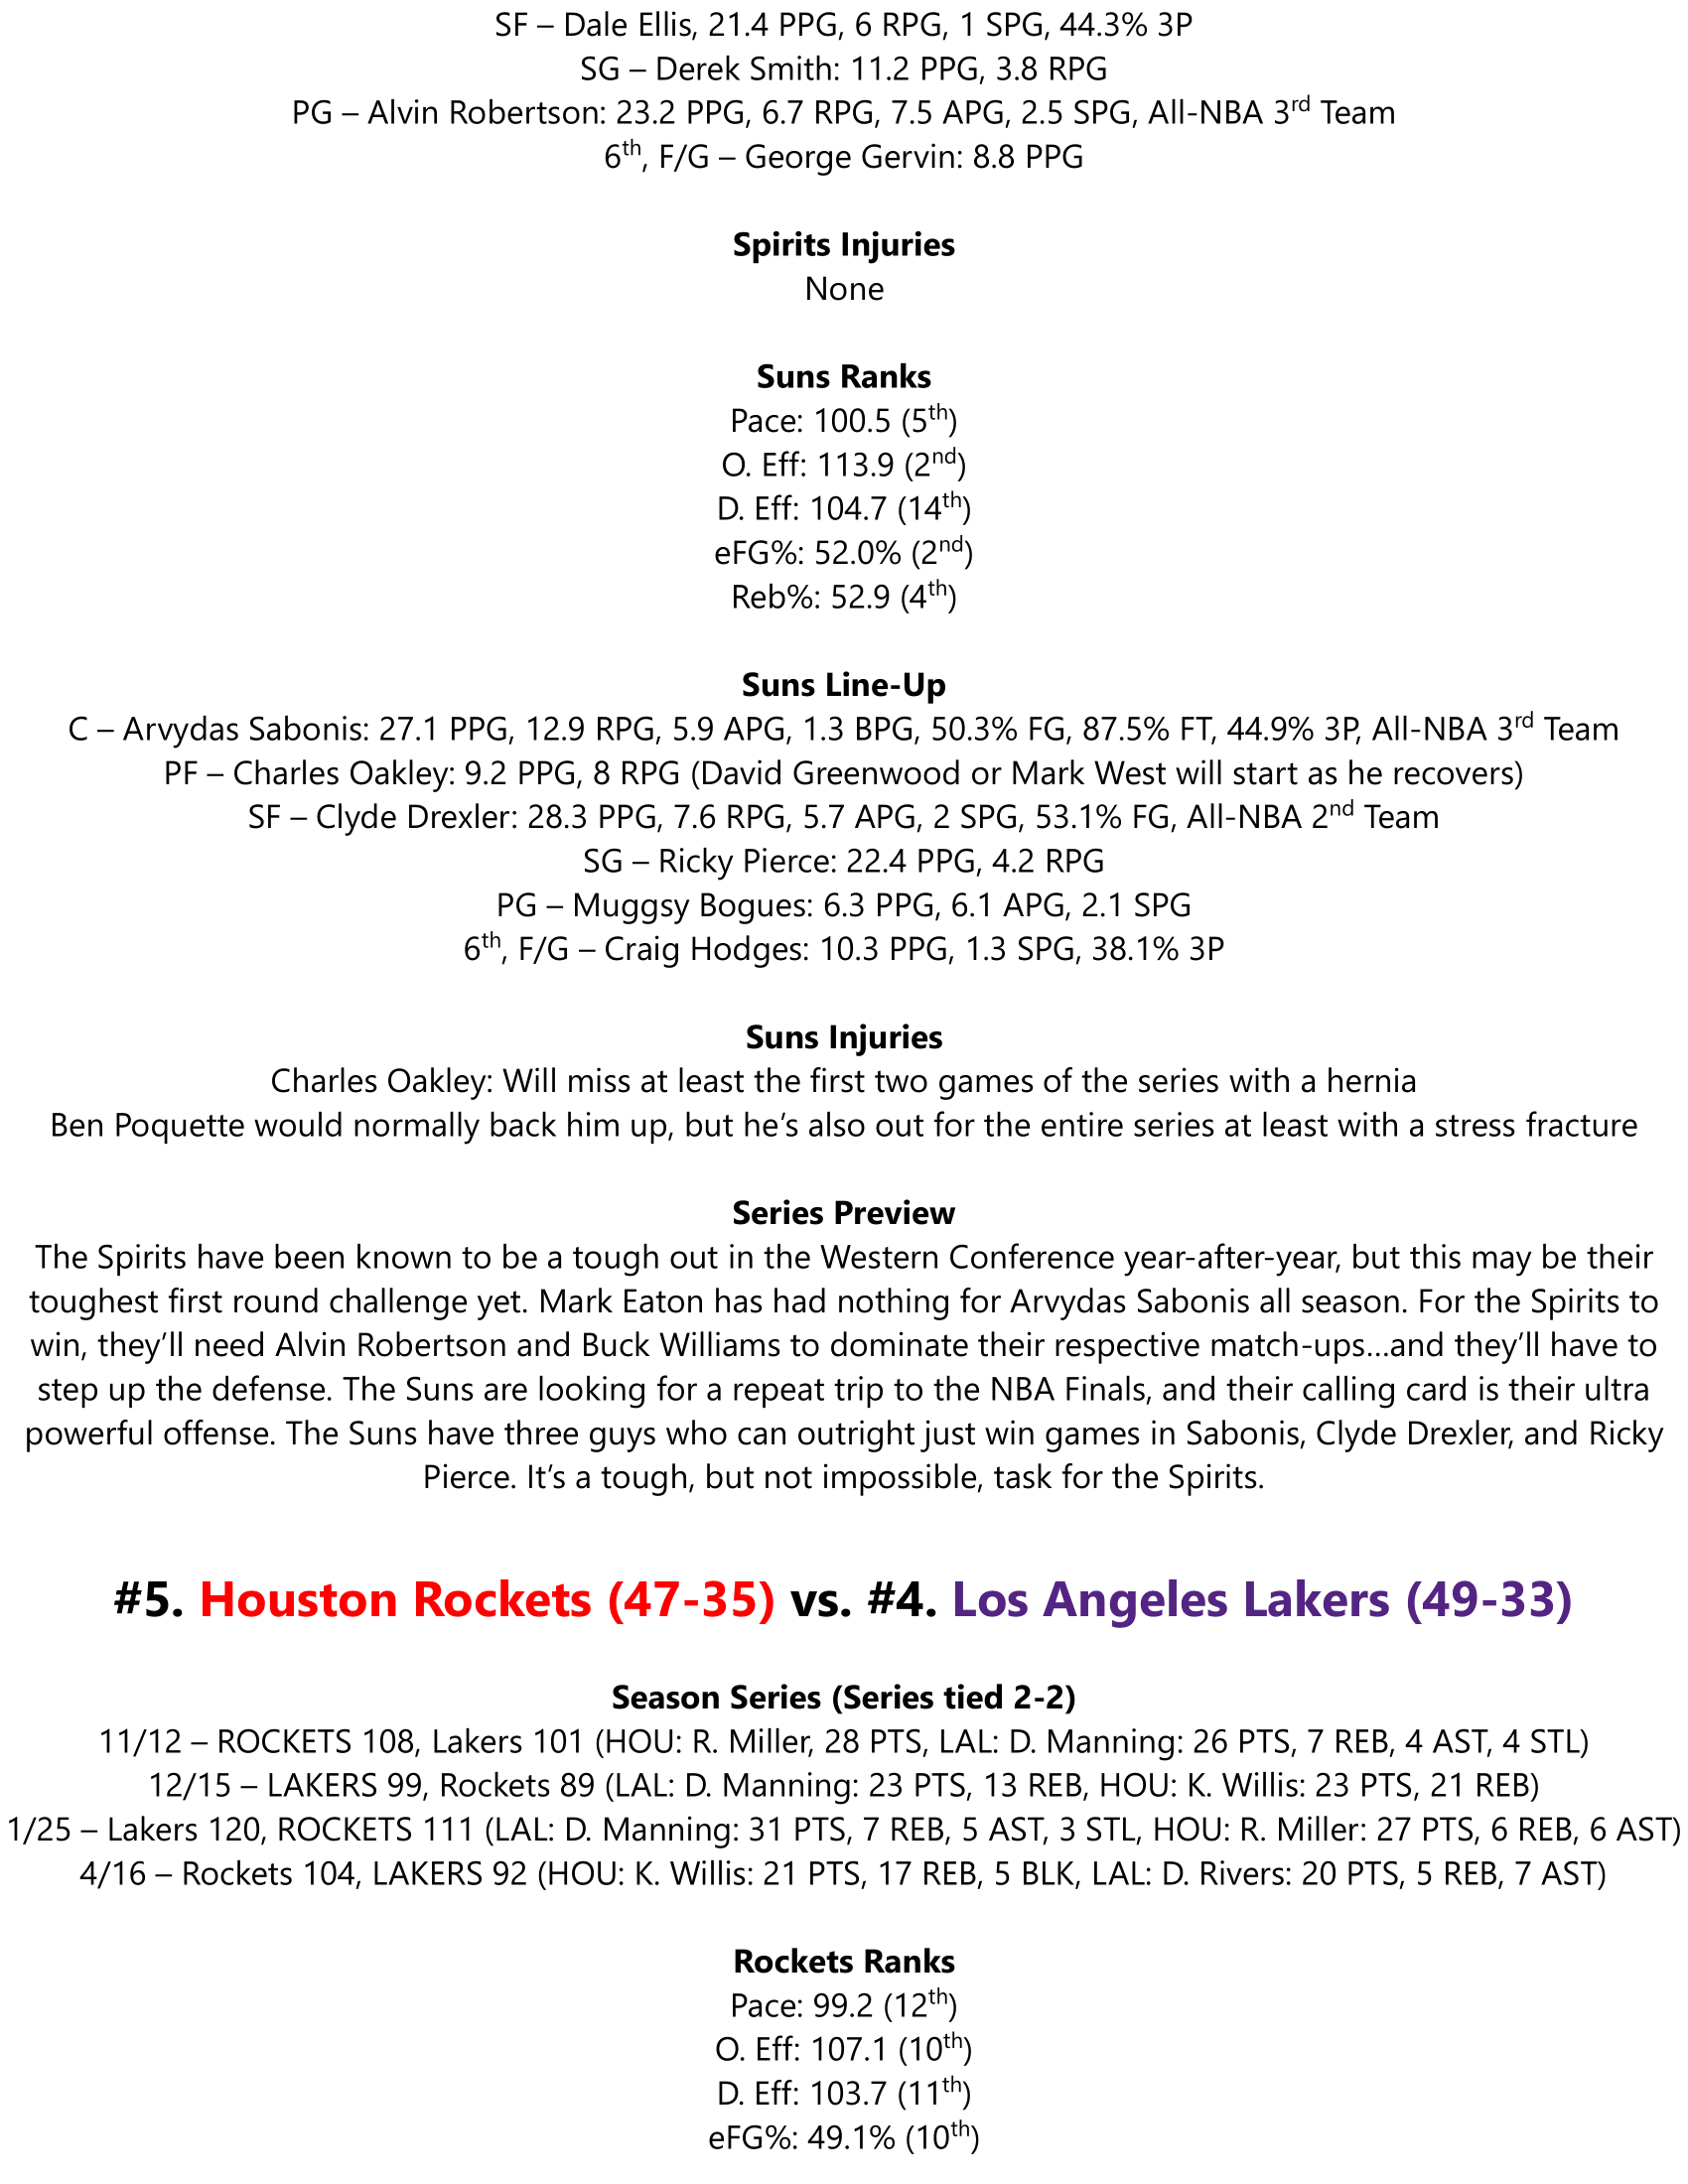 89-90-Part-4-Playoff-Preview-Round-1-02.png